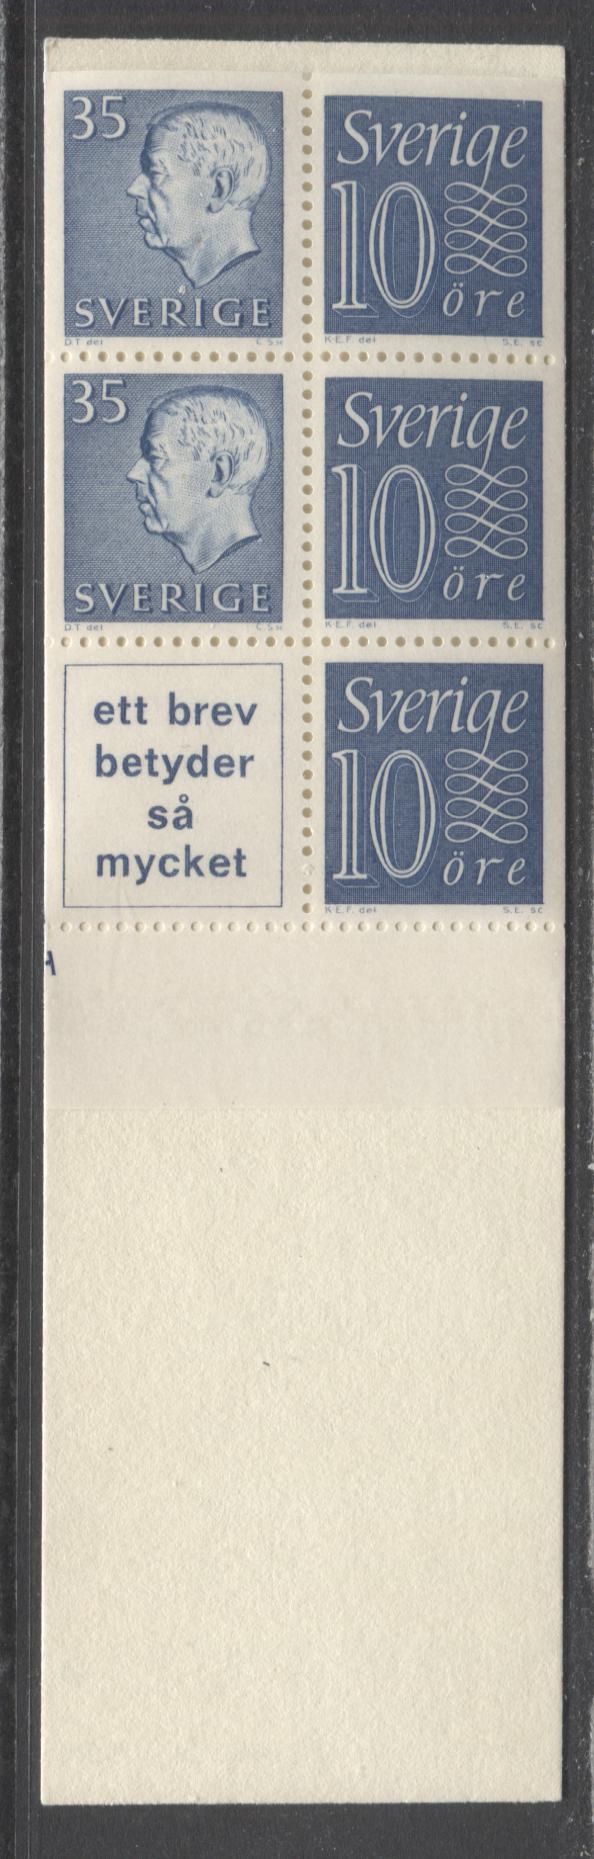 Lot 172 Sweden SC#586c (Facit #HA11BOH) 1963 Re-Engraved King Gustav VI Adolf Definitive Issue, With Inscribed Label, Inverted Pane, 10 Ore Stamps At Right, Bisected Horizontal Cylinder 1 Marking, A VFNH Booklet of 6 (2 +3 + Label), Estimated Value $15